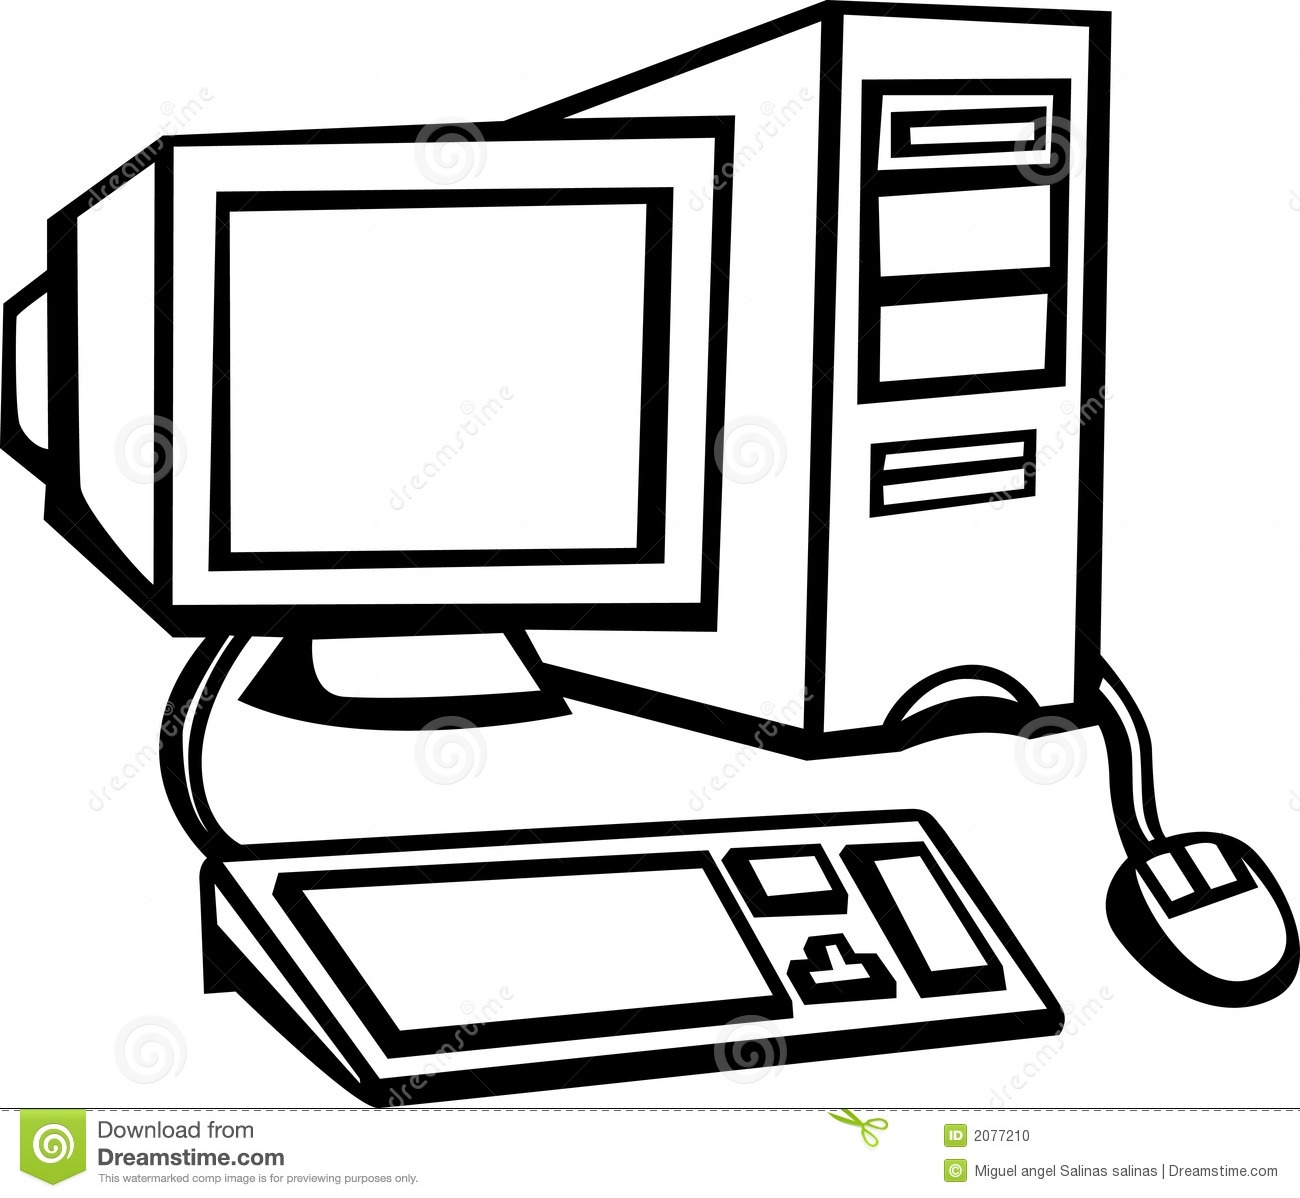 Computer Pictures Clipart.